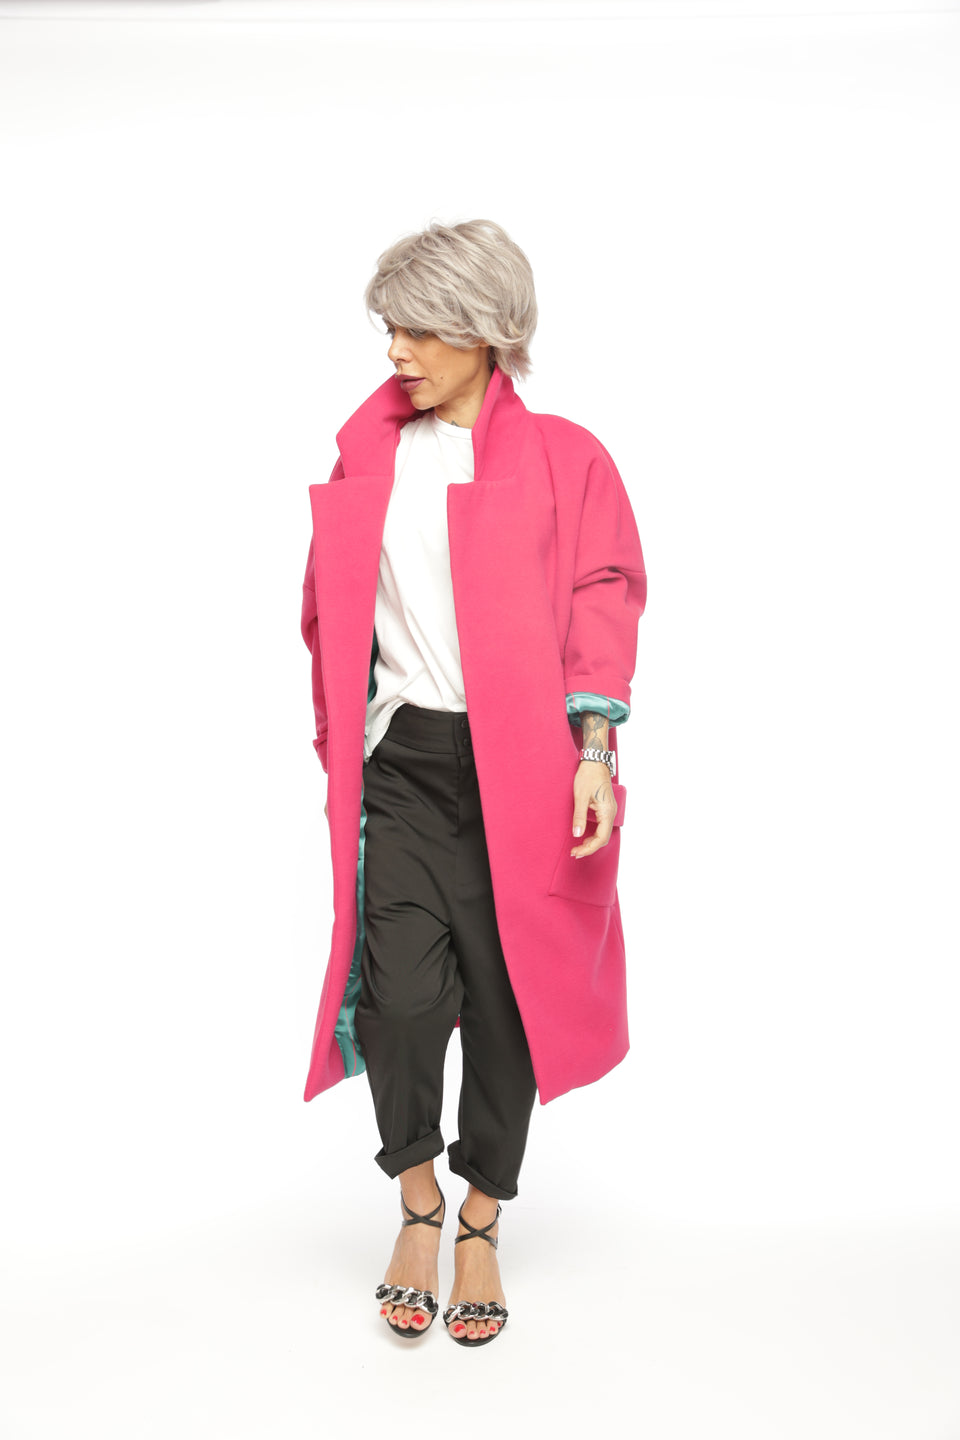 RELAXED PINK COLOR BLOCKING COAT WITH TEAL LINING